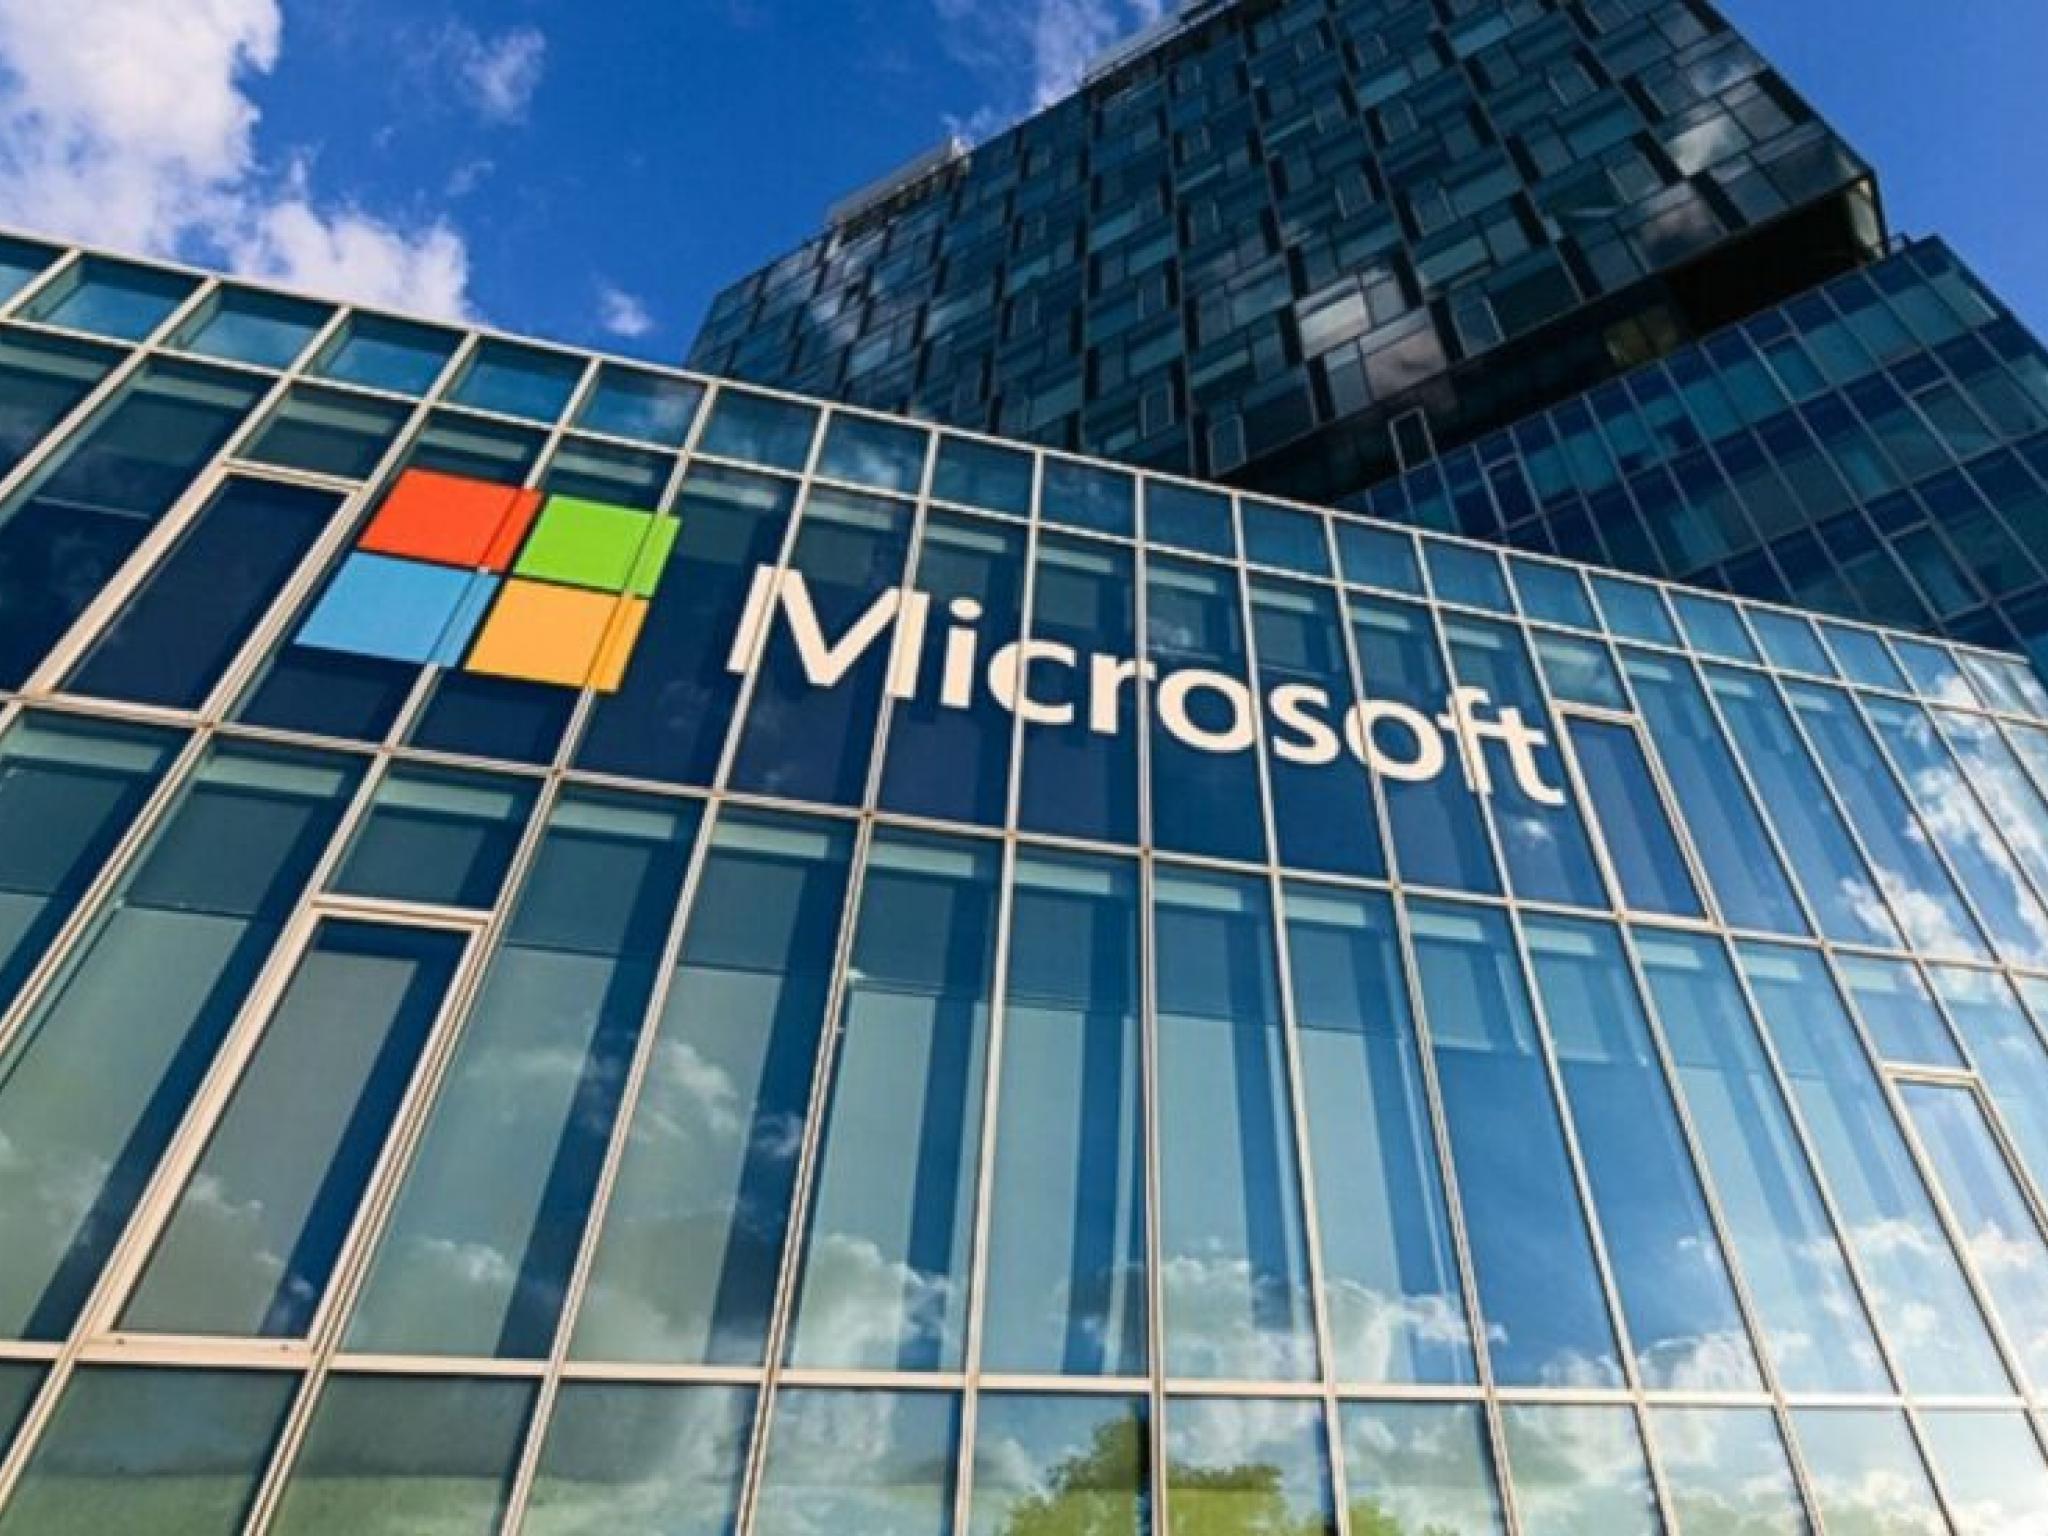  200-jobs-in-jeopardy-as-microsoft-halts-operations-at-nigeria-engineering-center-amid-economic-struggles 